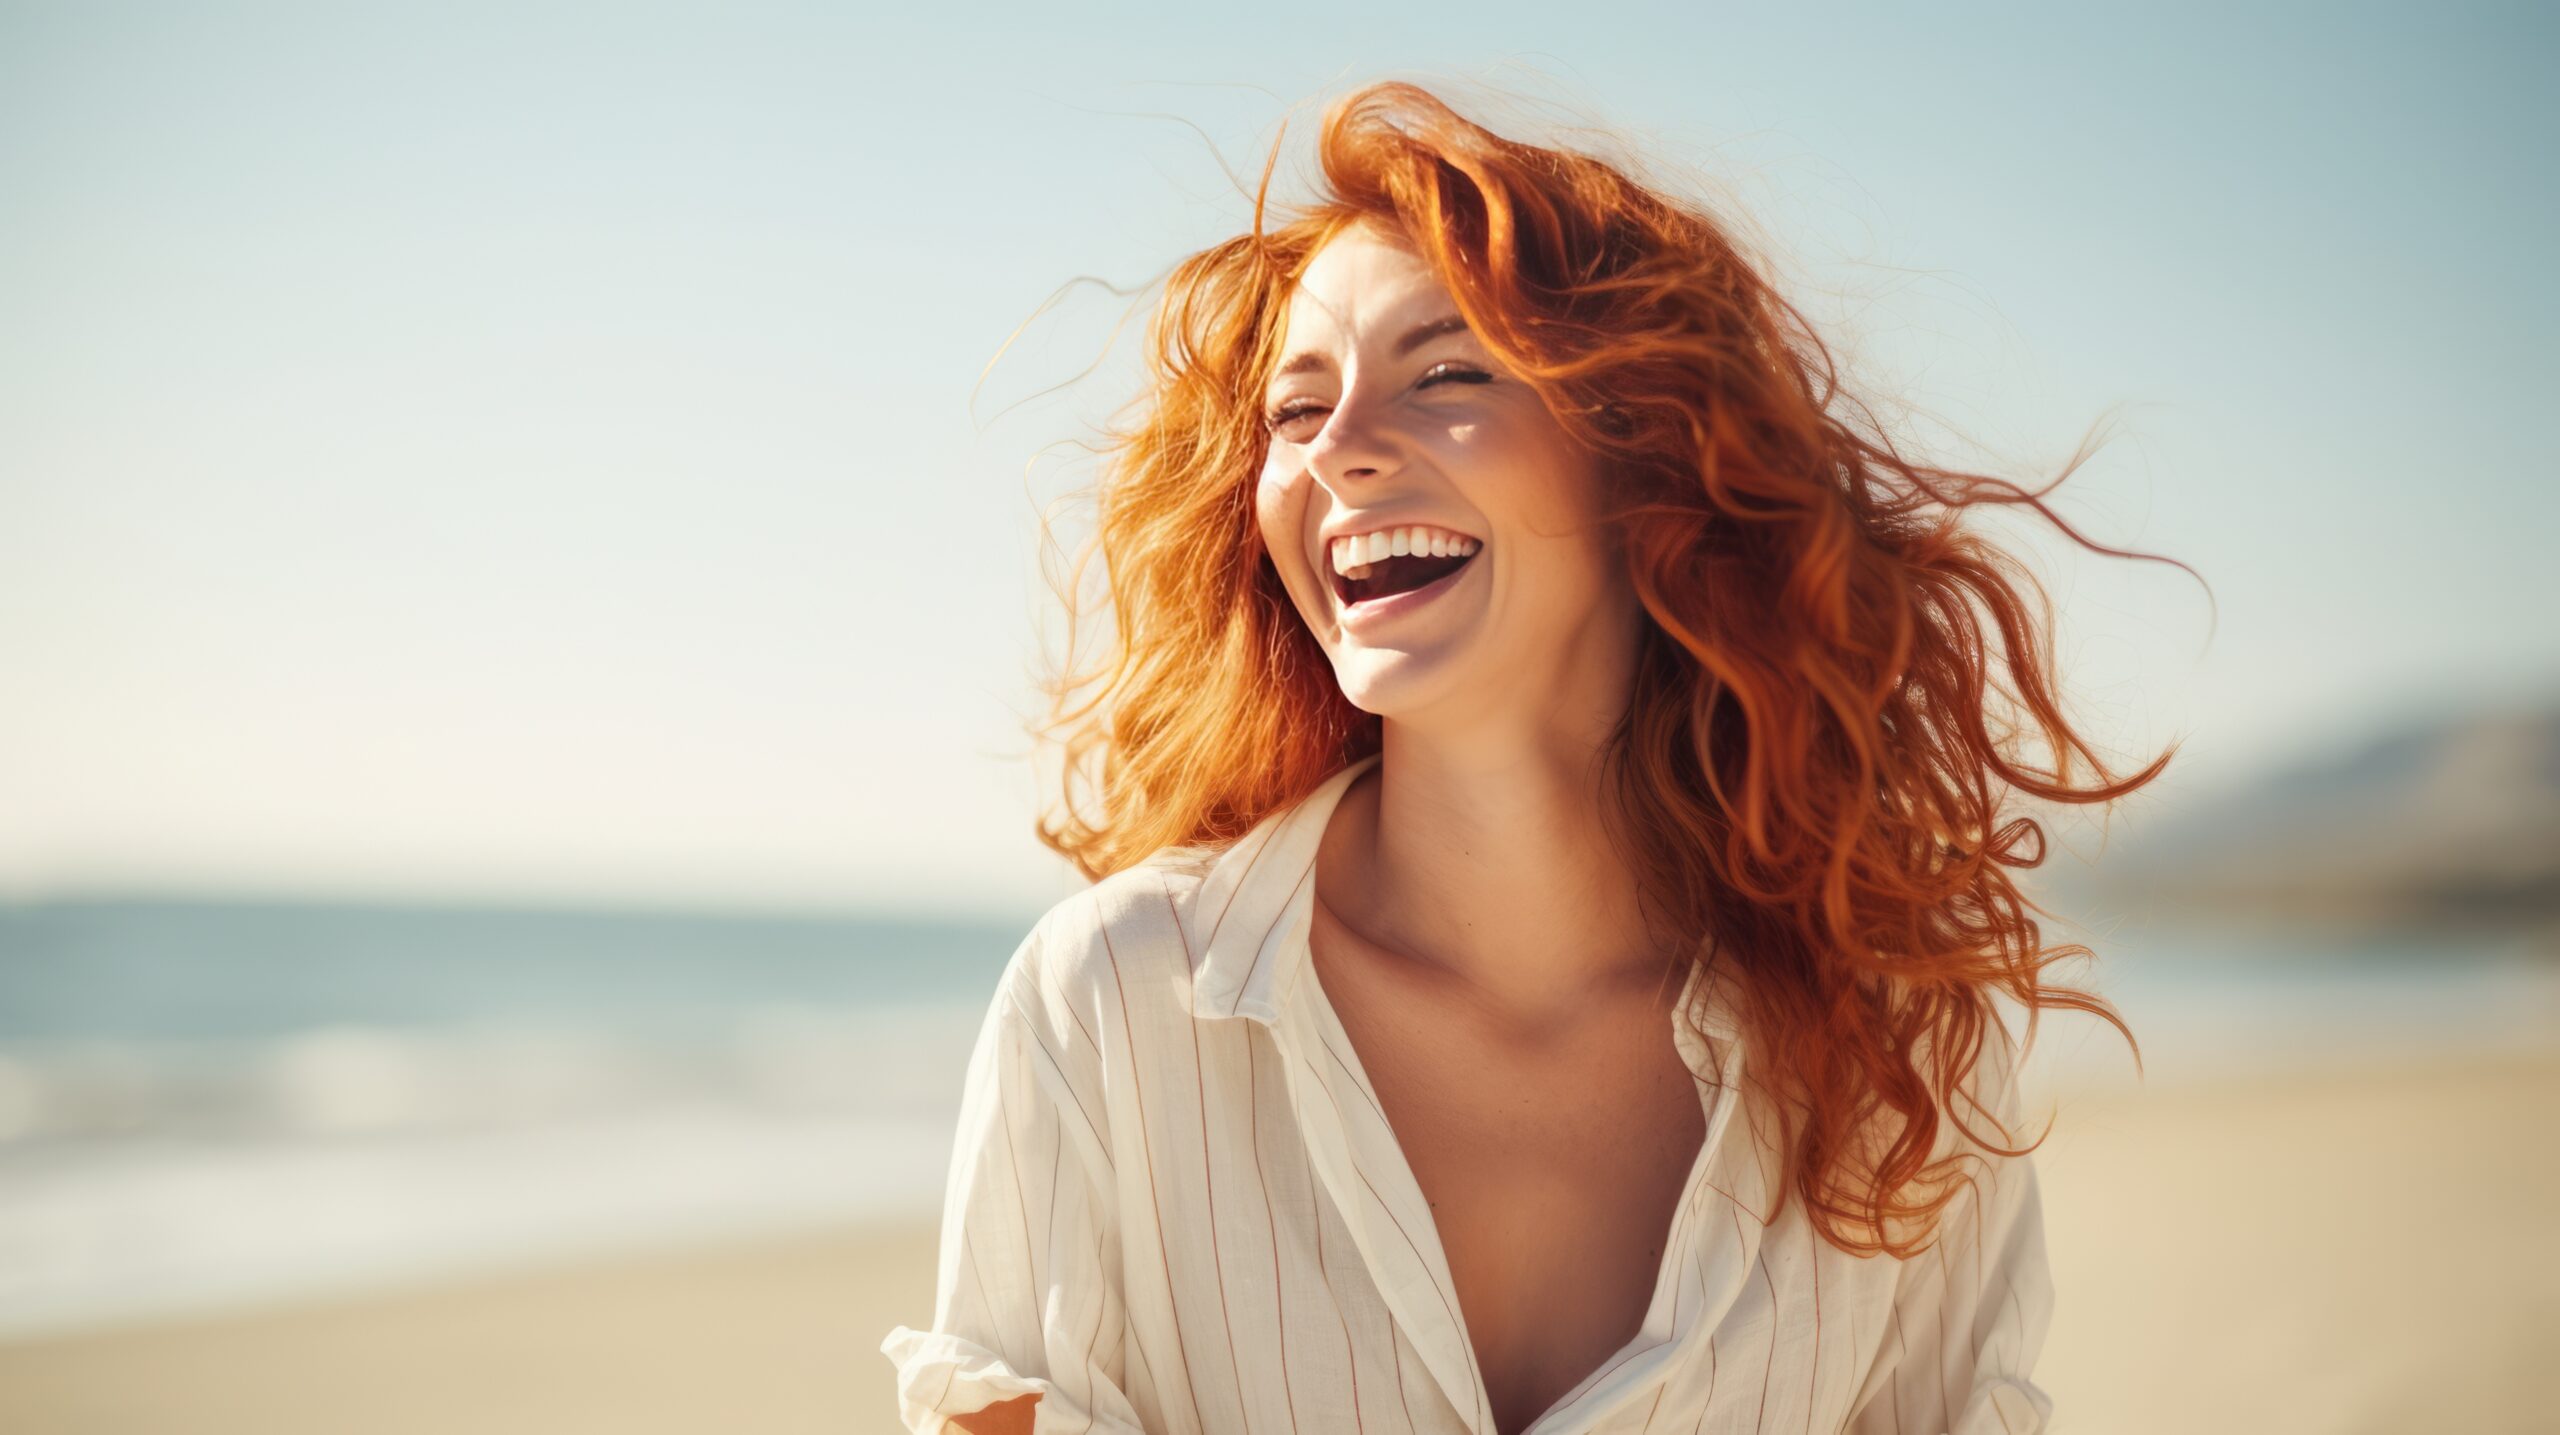 smiling woman with red hair on the beach